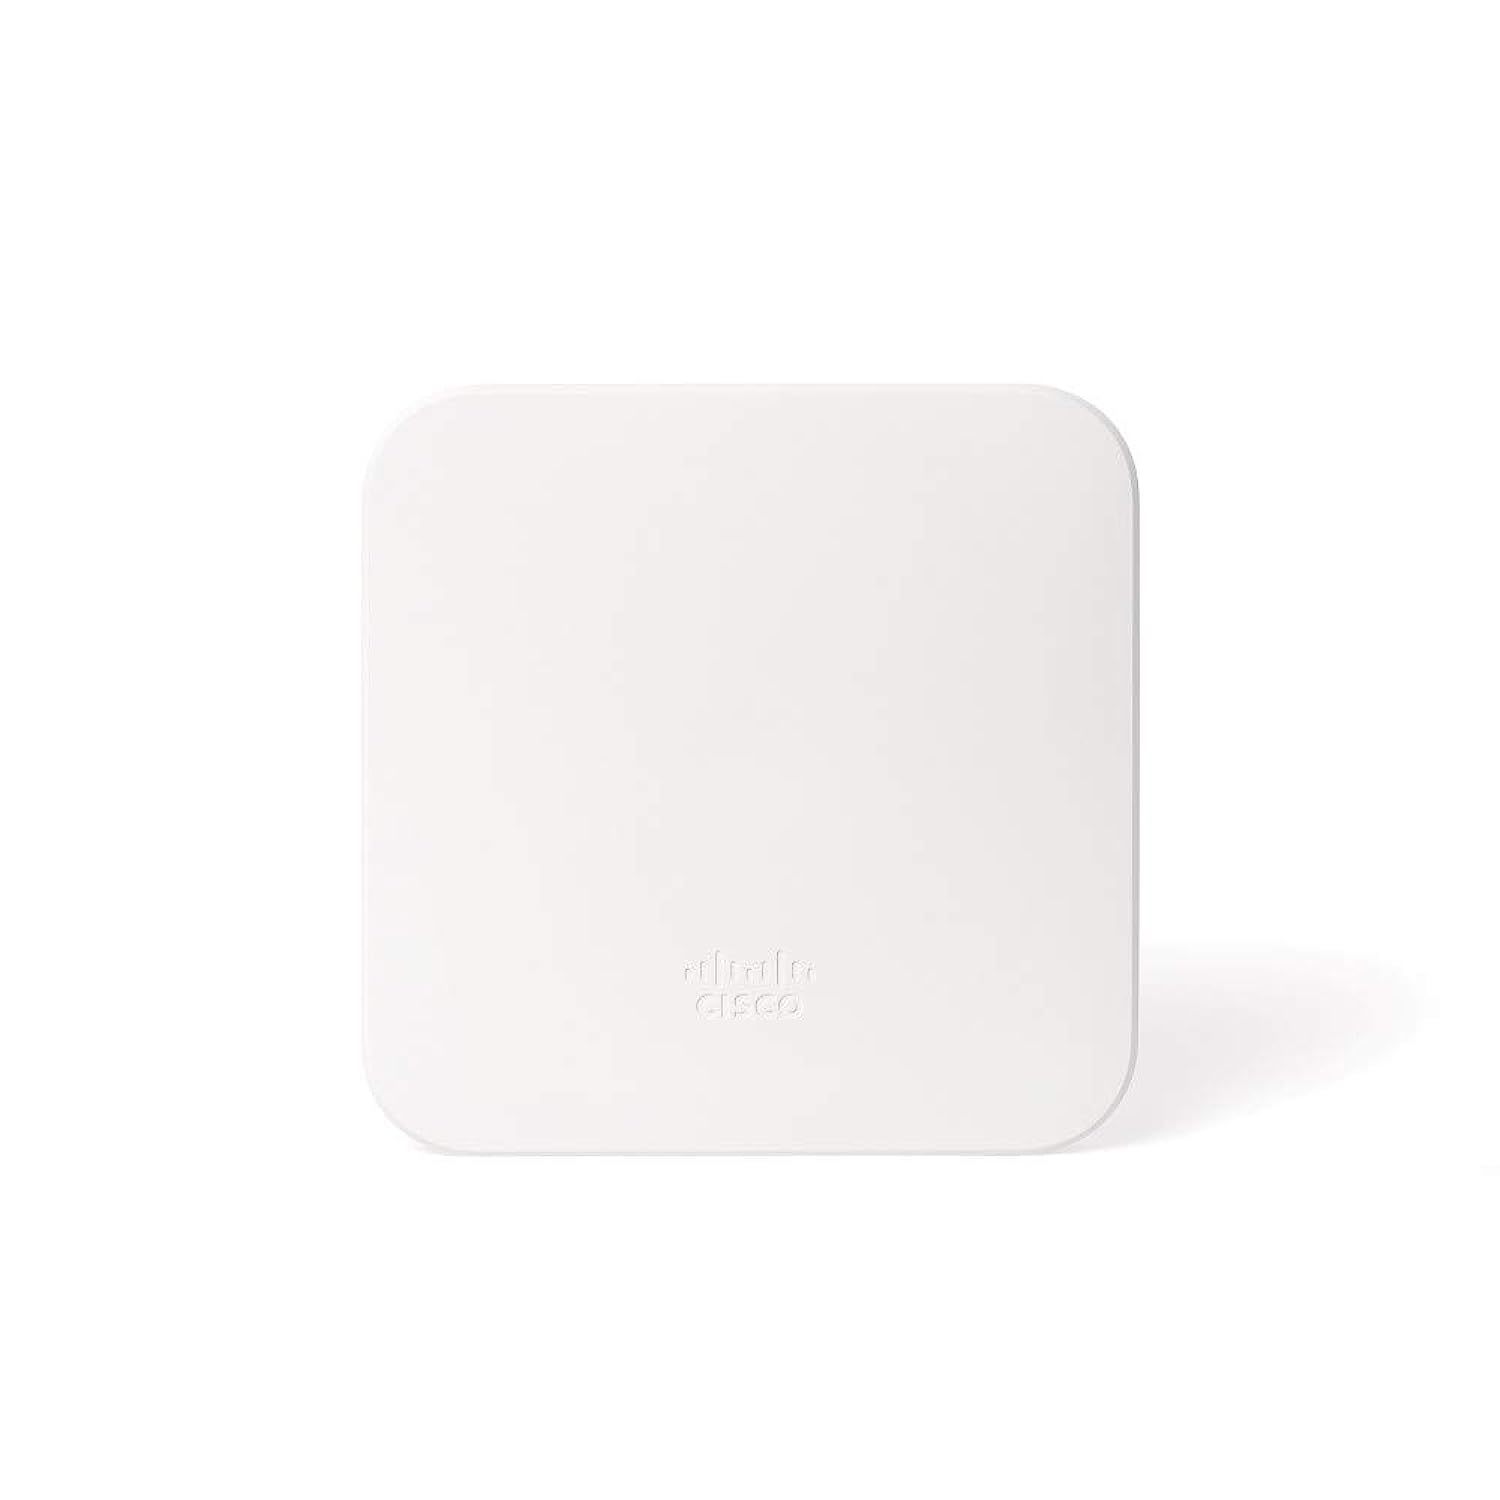 Primary image for Meraki Mg21 Cellular Gateway - Integrated Cat6 Modem - Up To 300Mbps